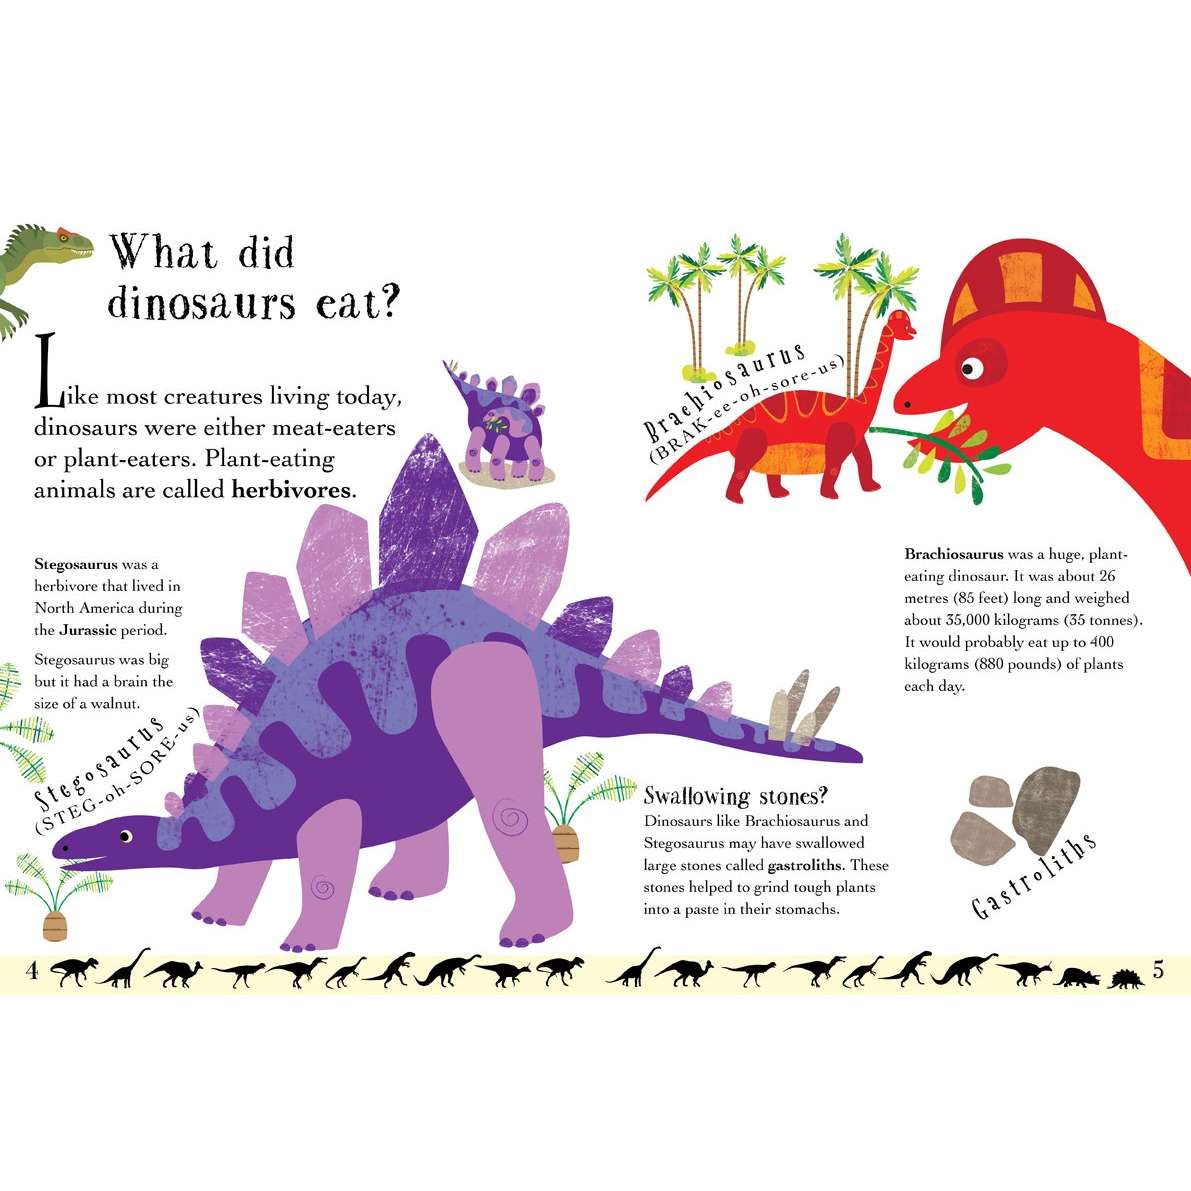 Children's Books :: All Books About Animals :: Dinosaur Books for Children  :: Dinosaurs and Other Prehistoric Giants (Learn, Press-Out & Play) -  Paradise Cay - Wholesale Books, Gifts, Navigational Charts, On Demand  Publishing